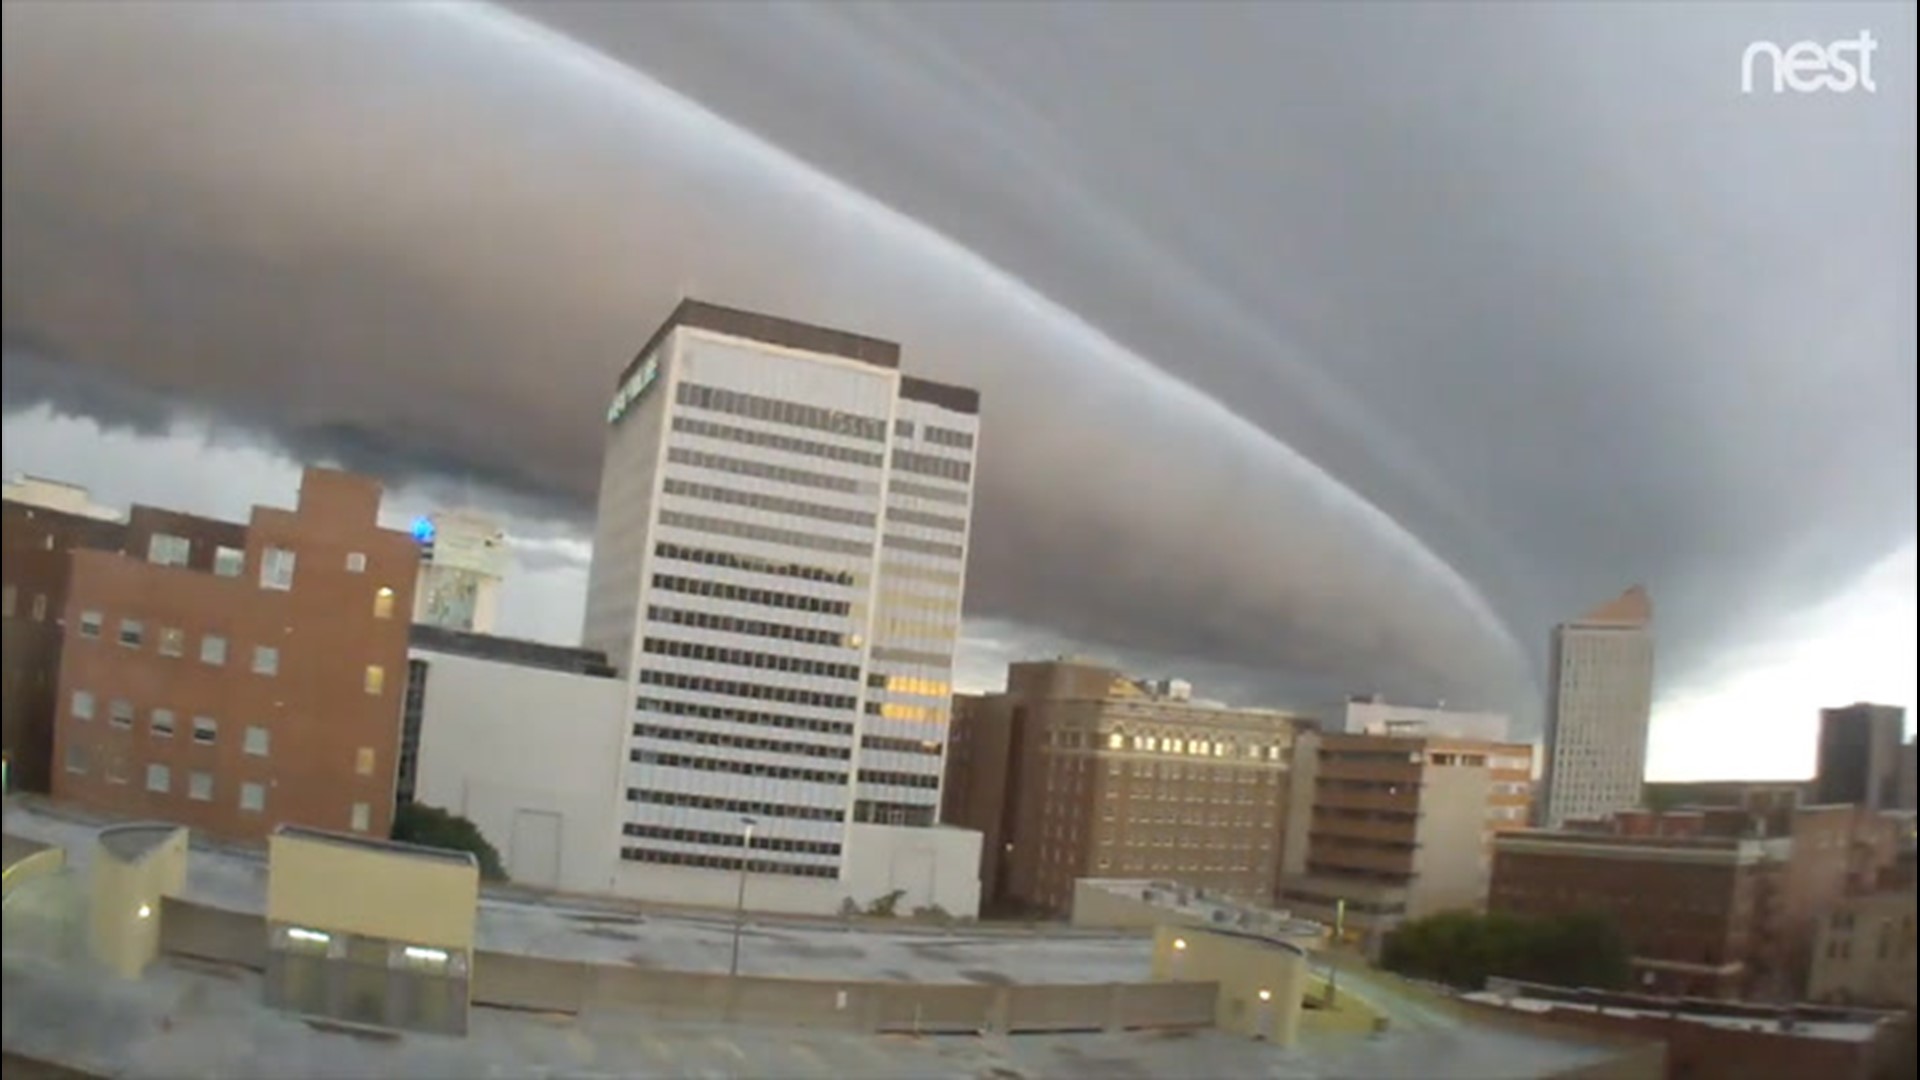 This time-lapse video shows a shelf cloud from a severe thunderstorm moving over AccuWeather's office in Wichita, Kansas, on the morning of July 16.